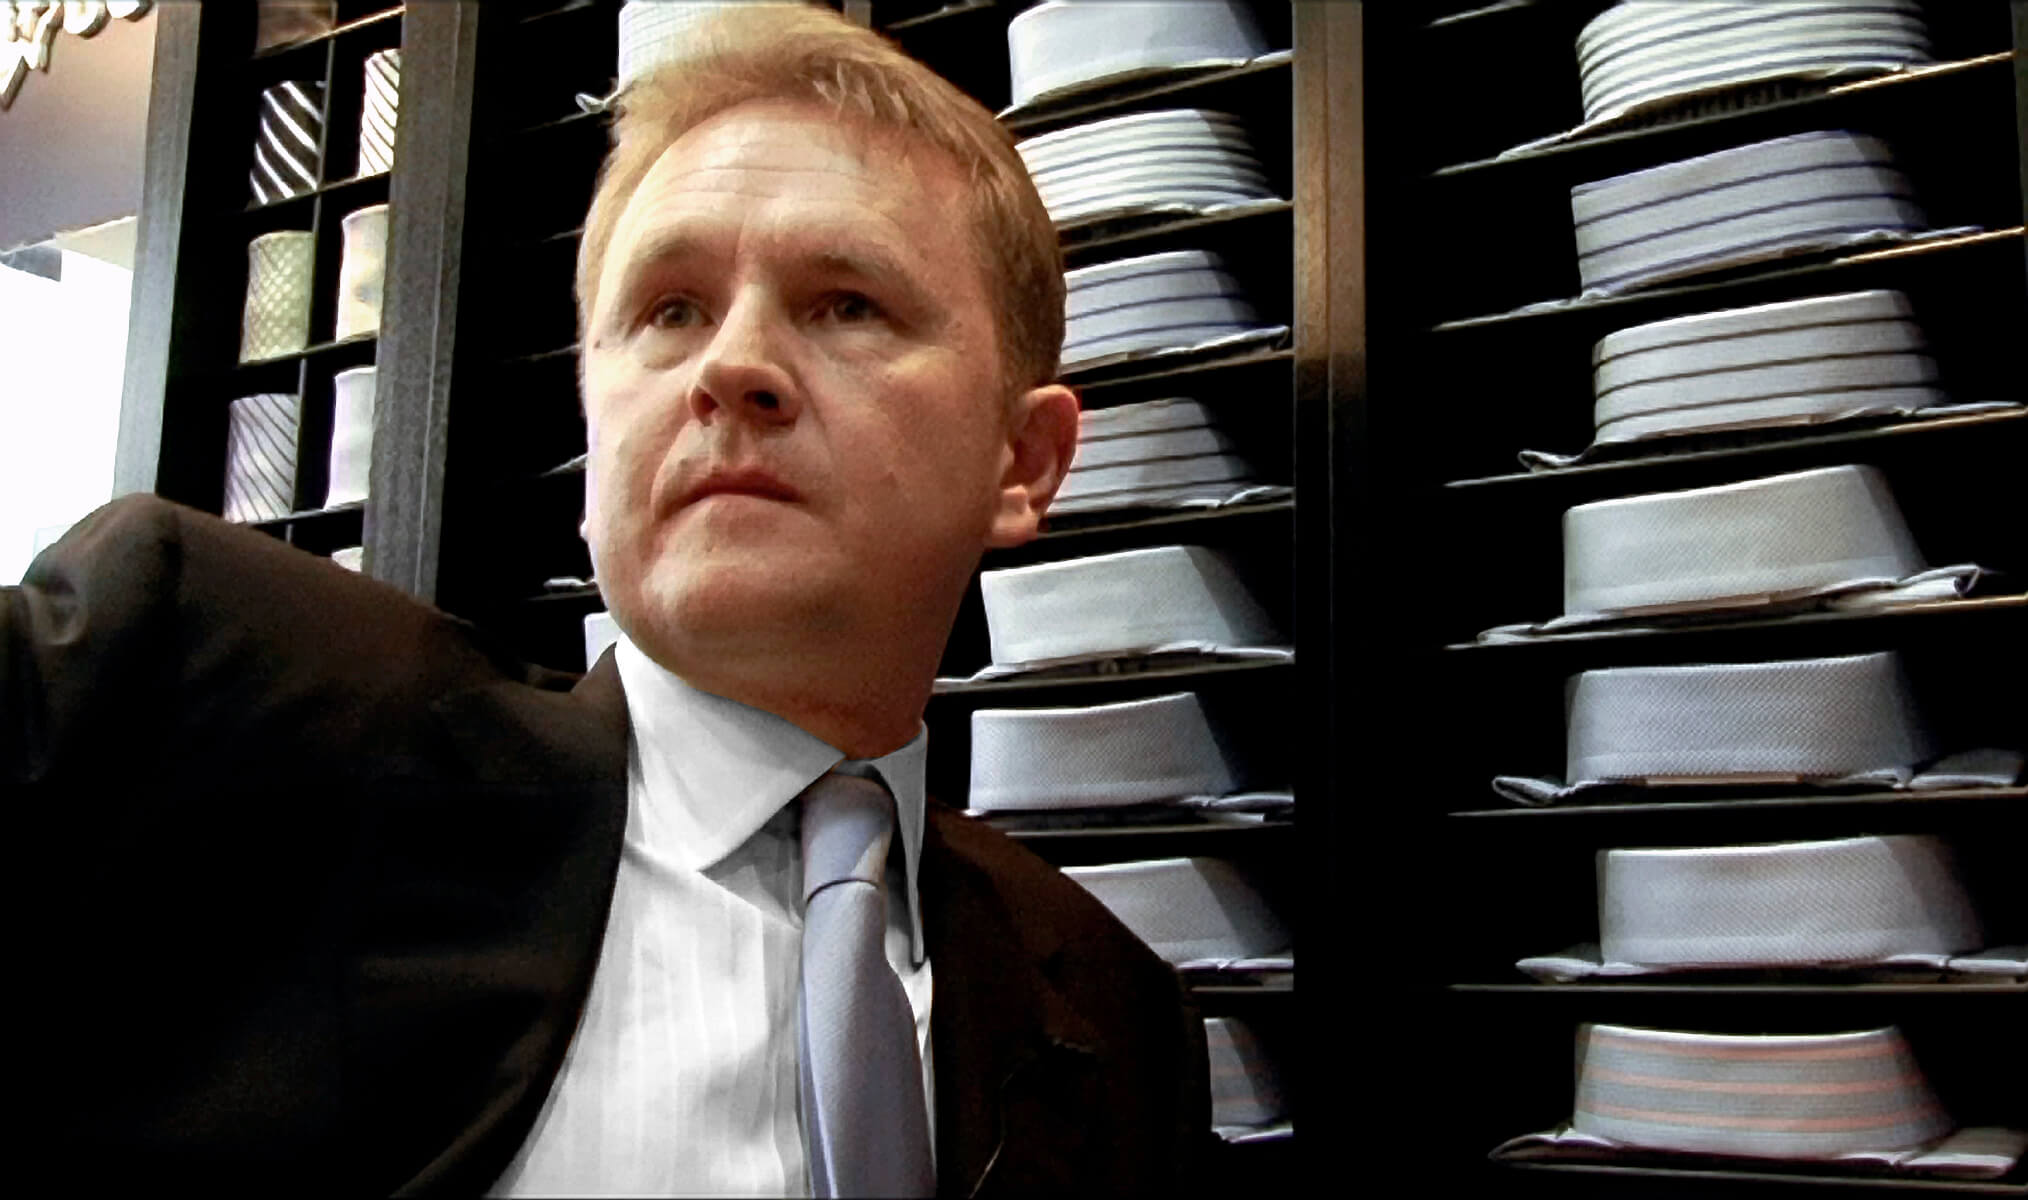 Still from My Perestroika. A man in a suit and tie stands infront rows of button up shirts folded on shelves.